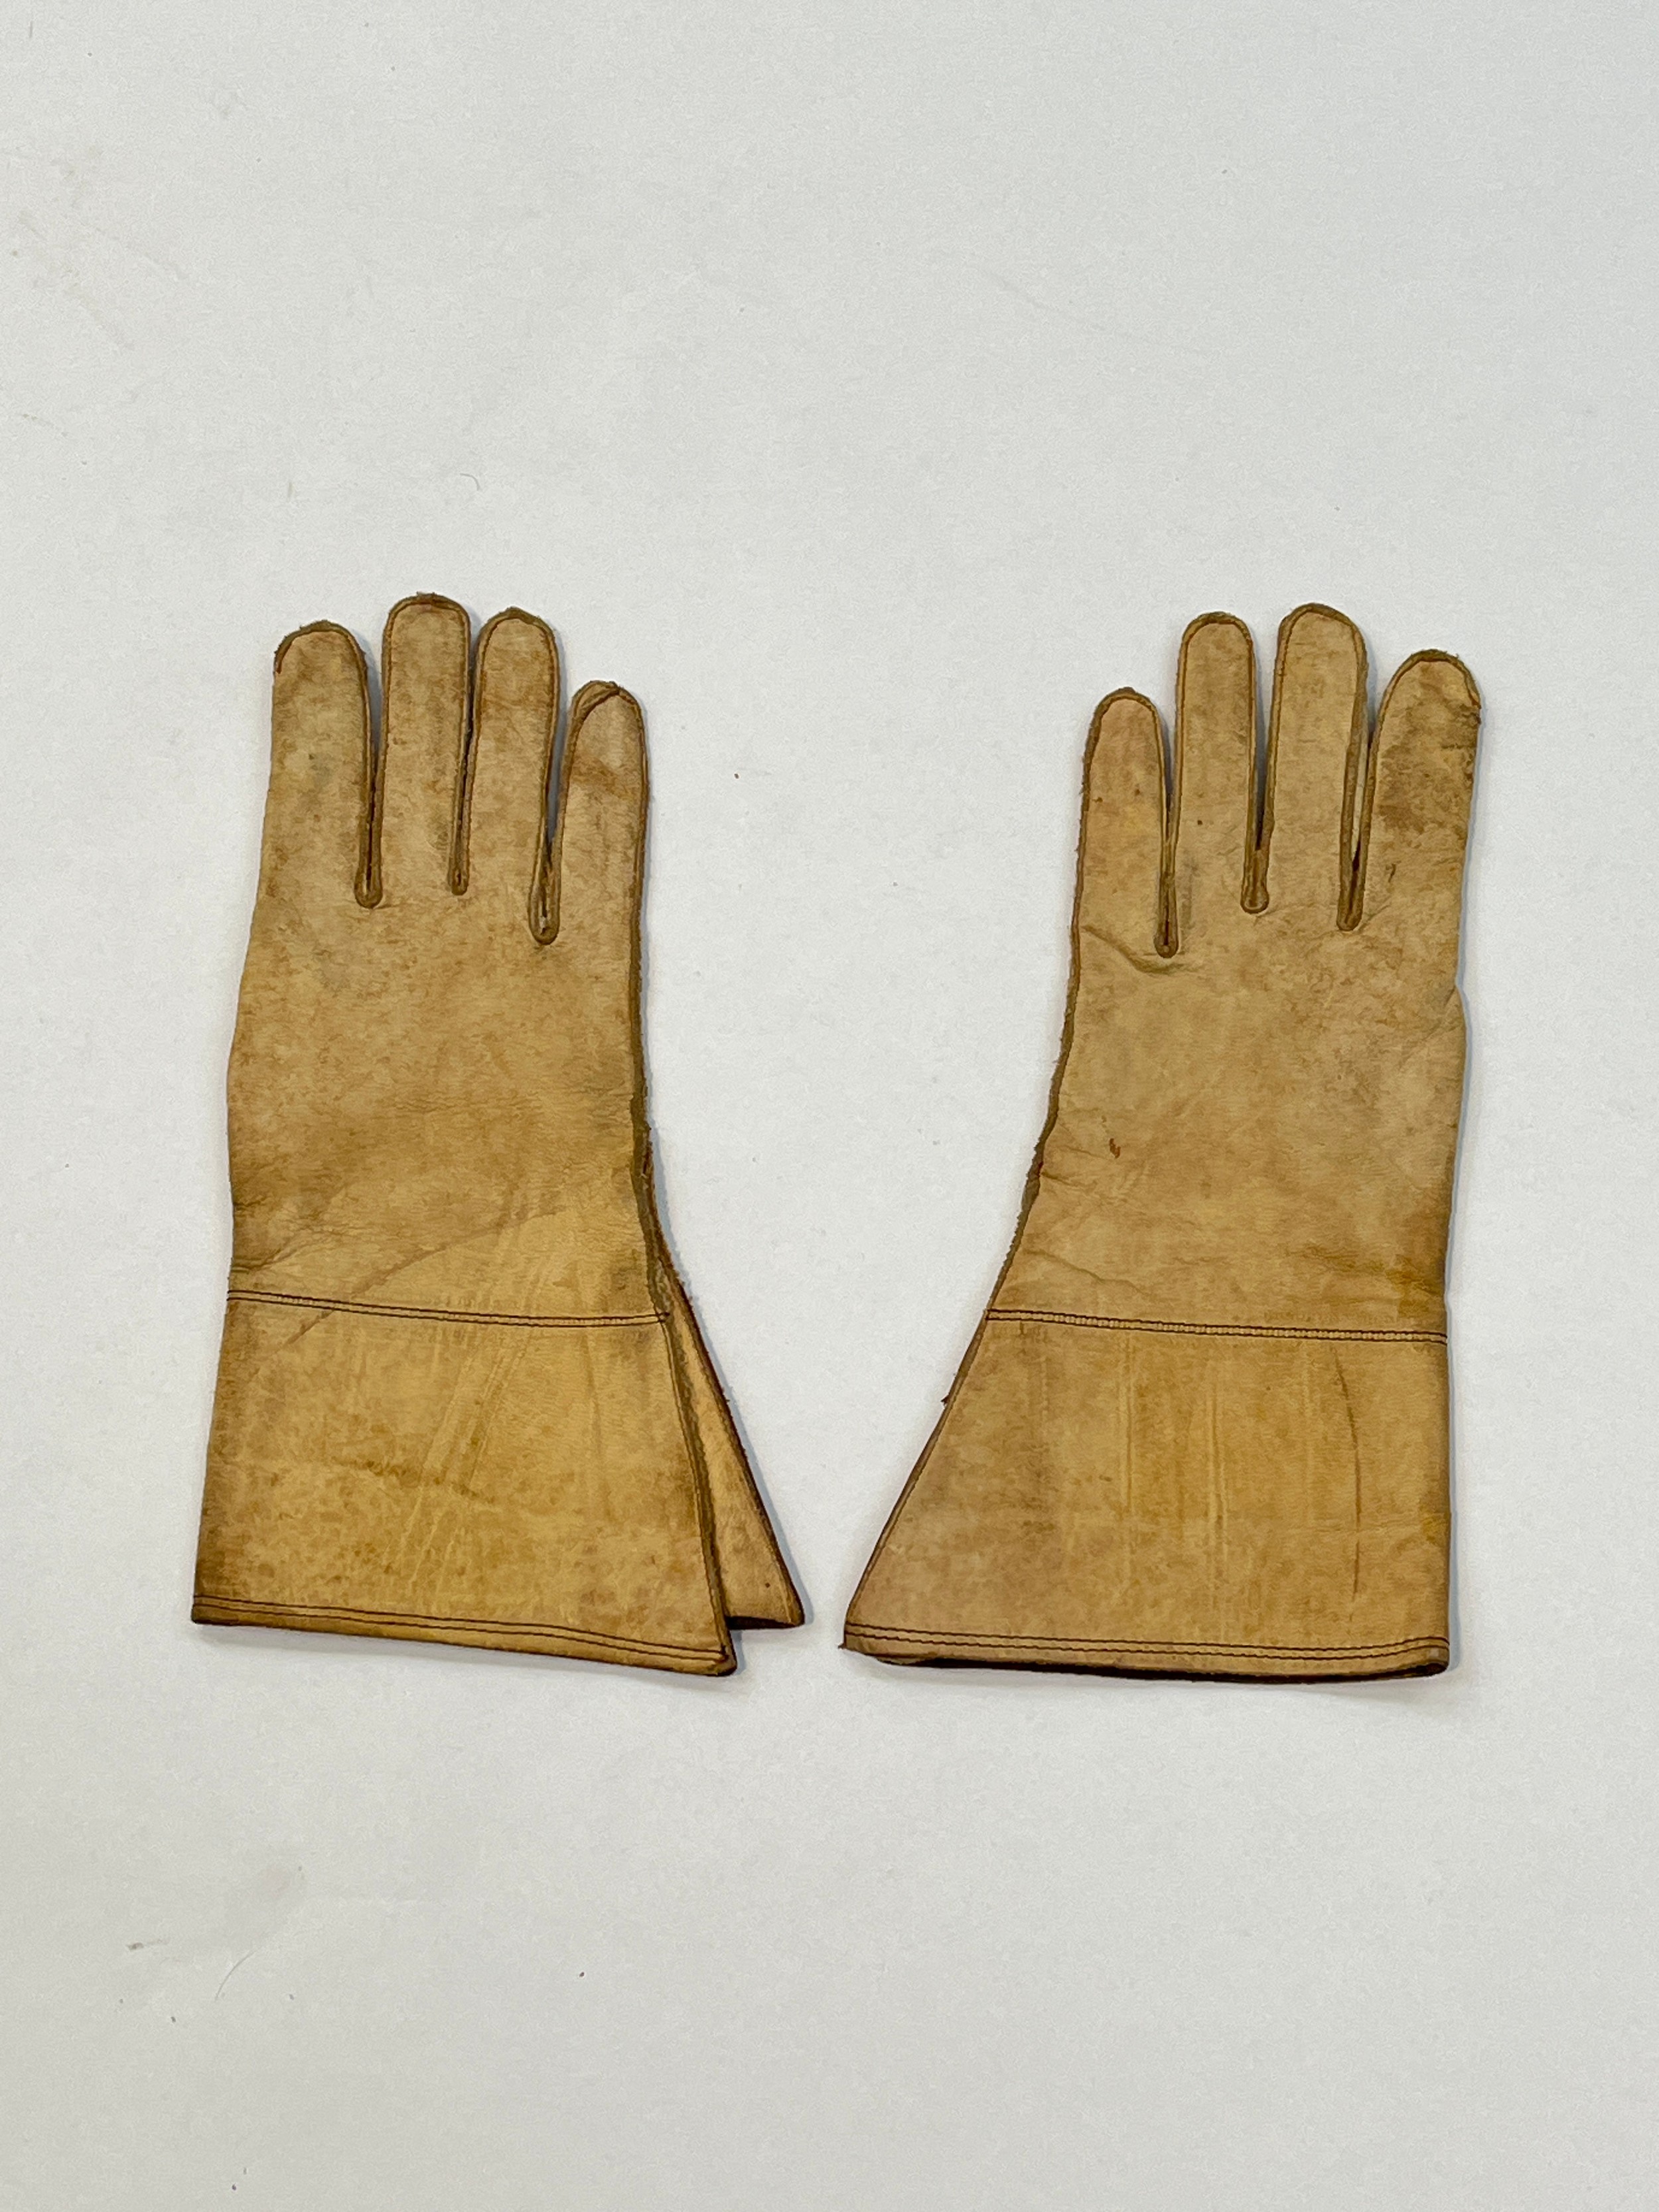 A pair of WWII British driver's leather gloves, maker marked Frank Bryan Ltd and dated 1943 - Image 2 of 2